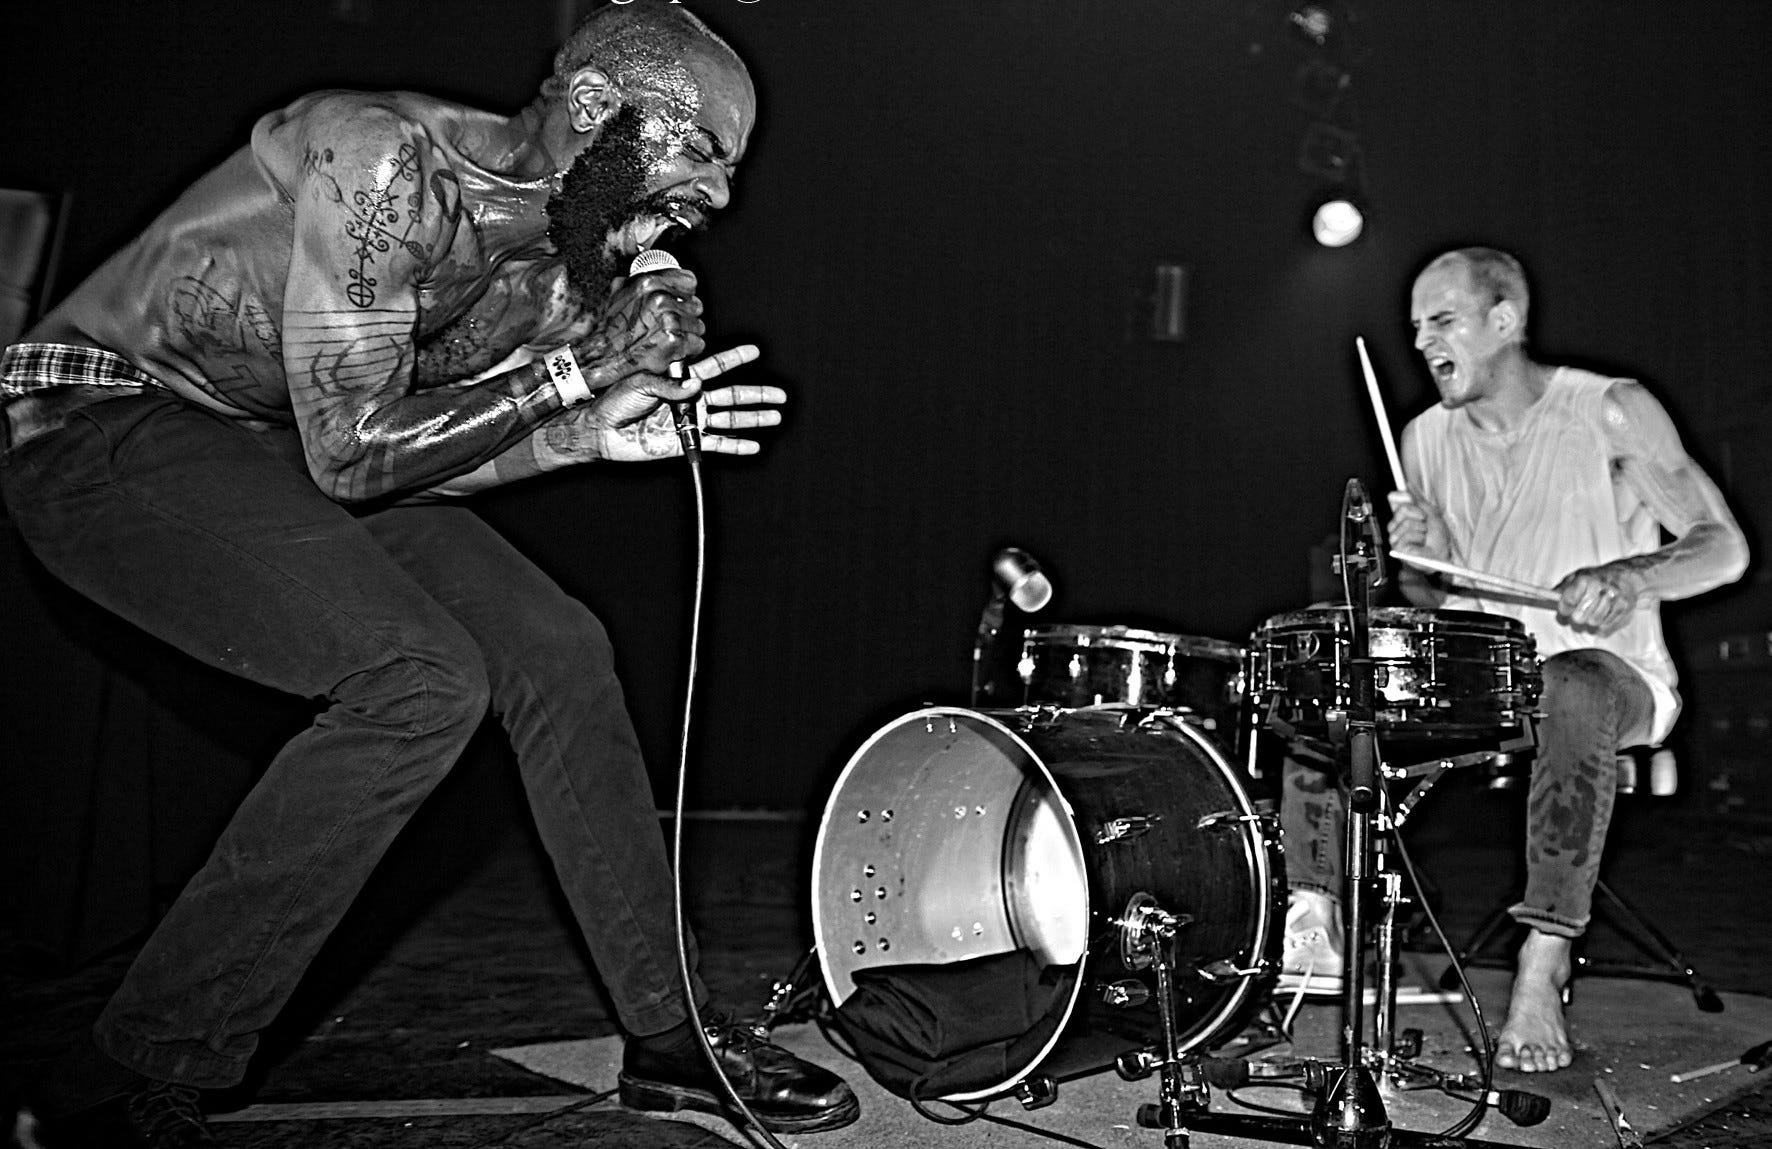 Using Data to Find the Angriest Death Grips Song | by Evan Oppenheimer |  Medium